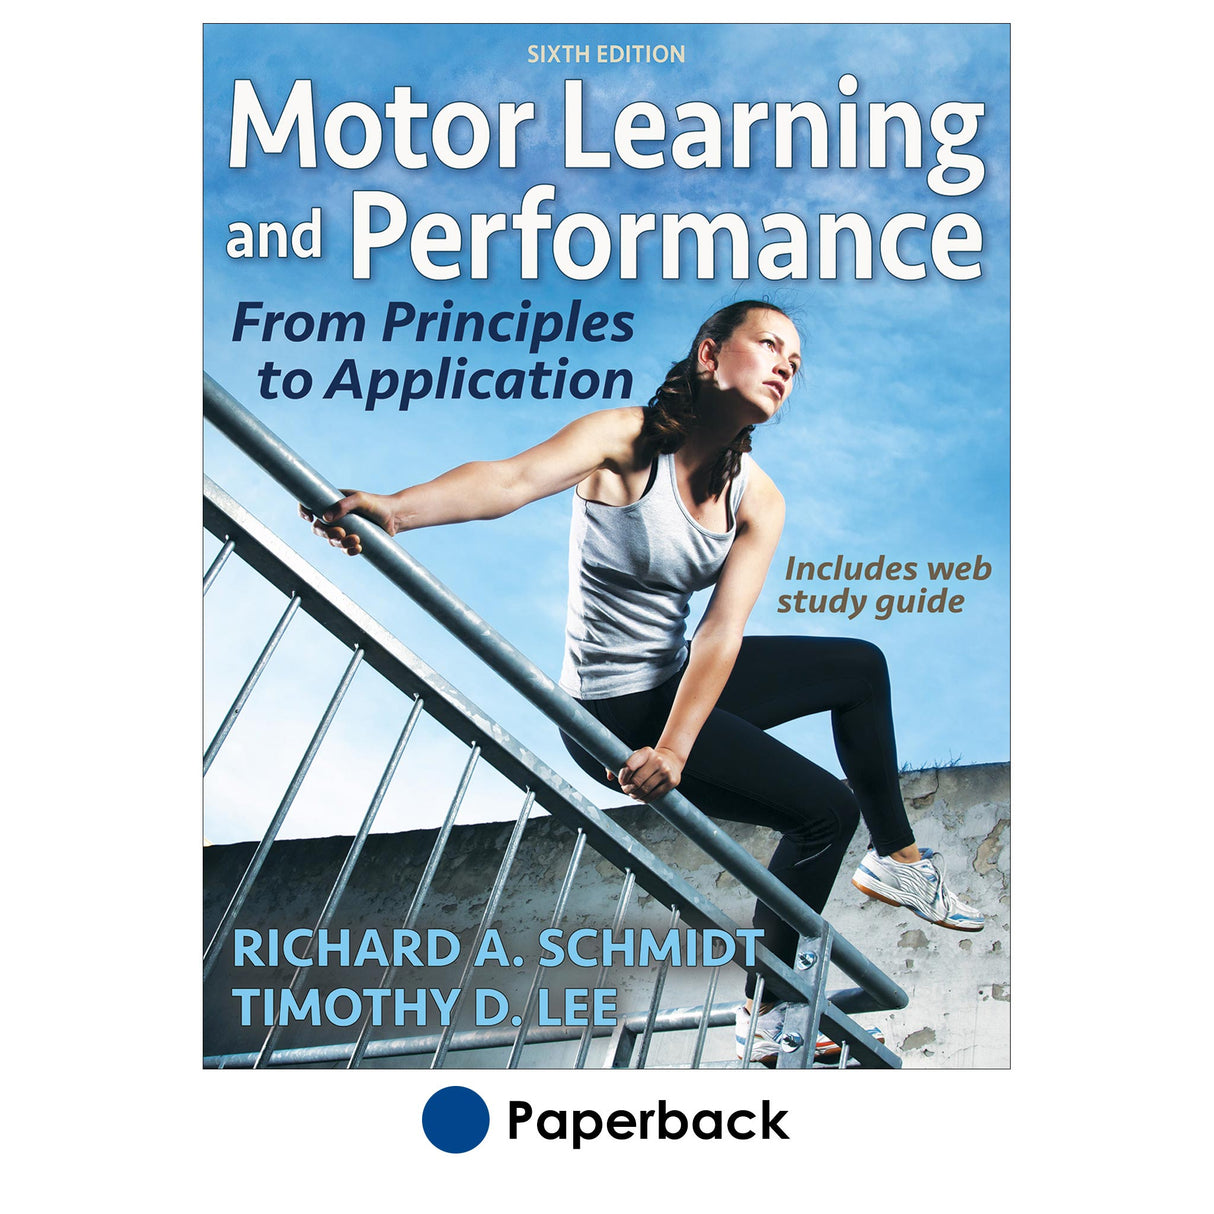 Motor Learning and Performance 6th Edition With Web Study Guide